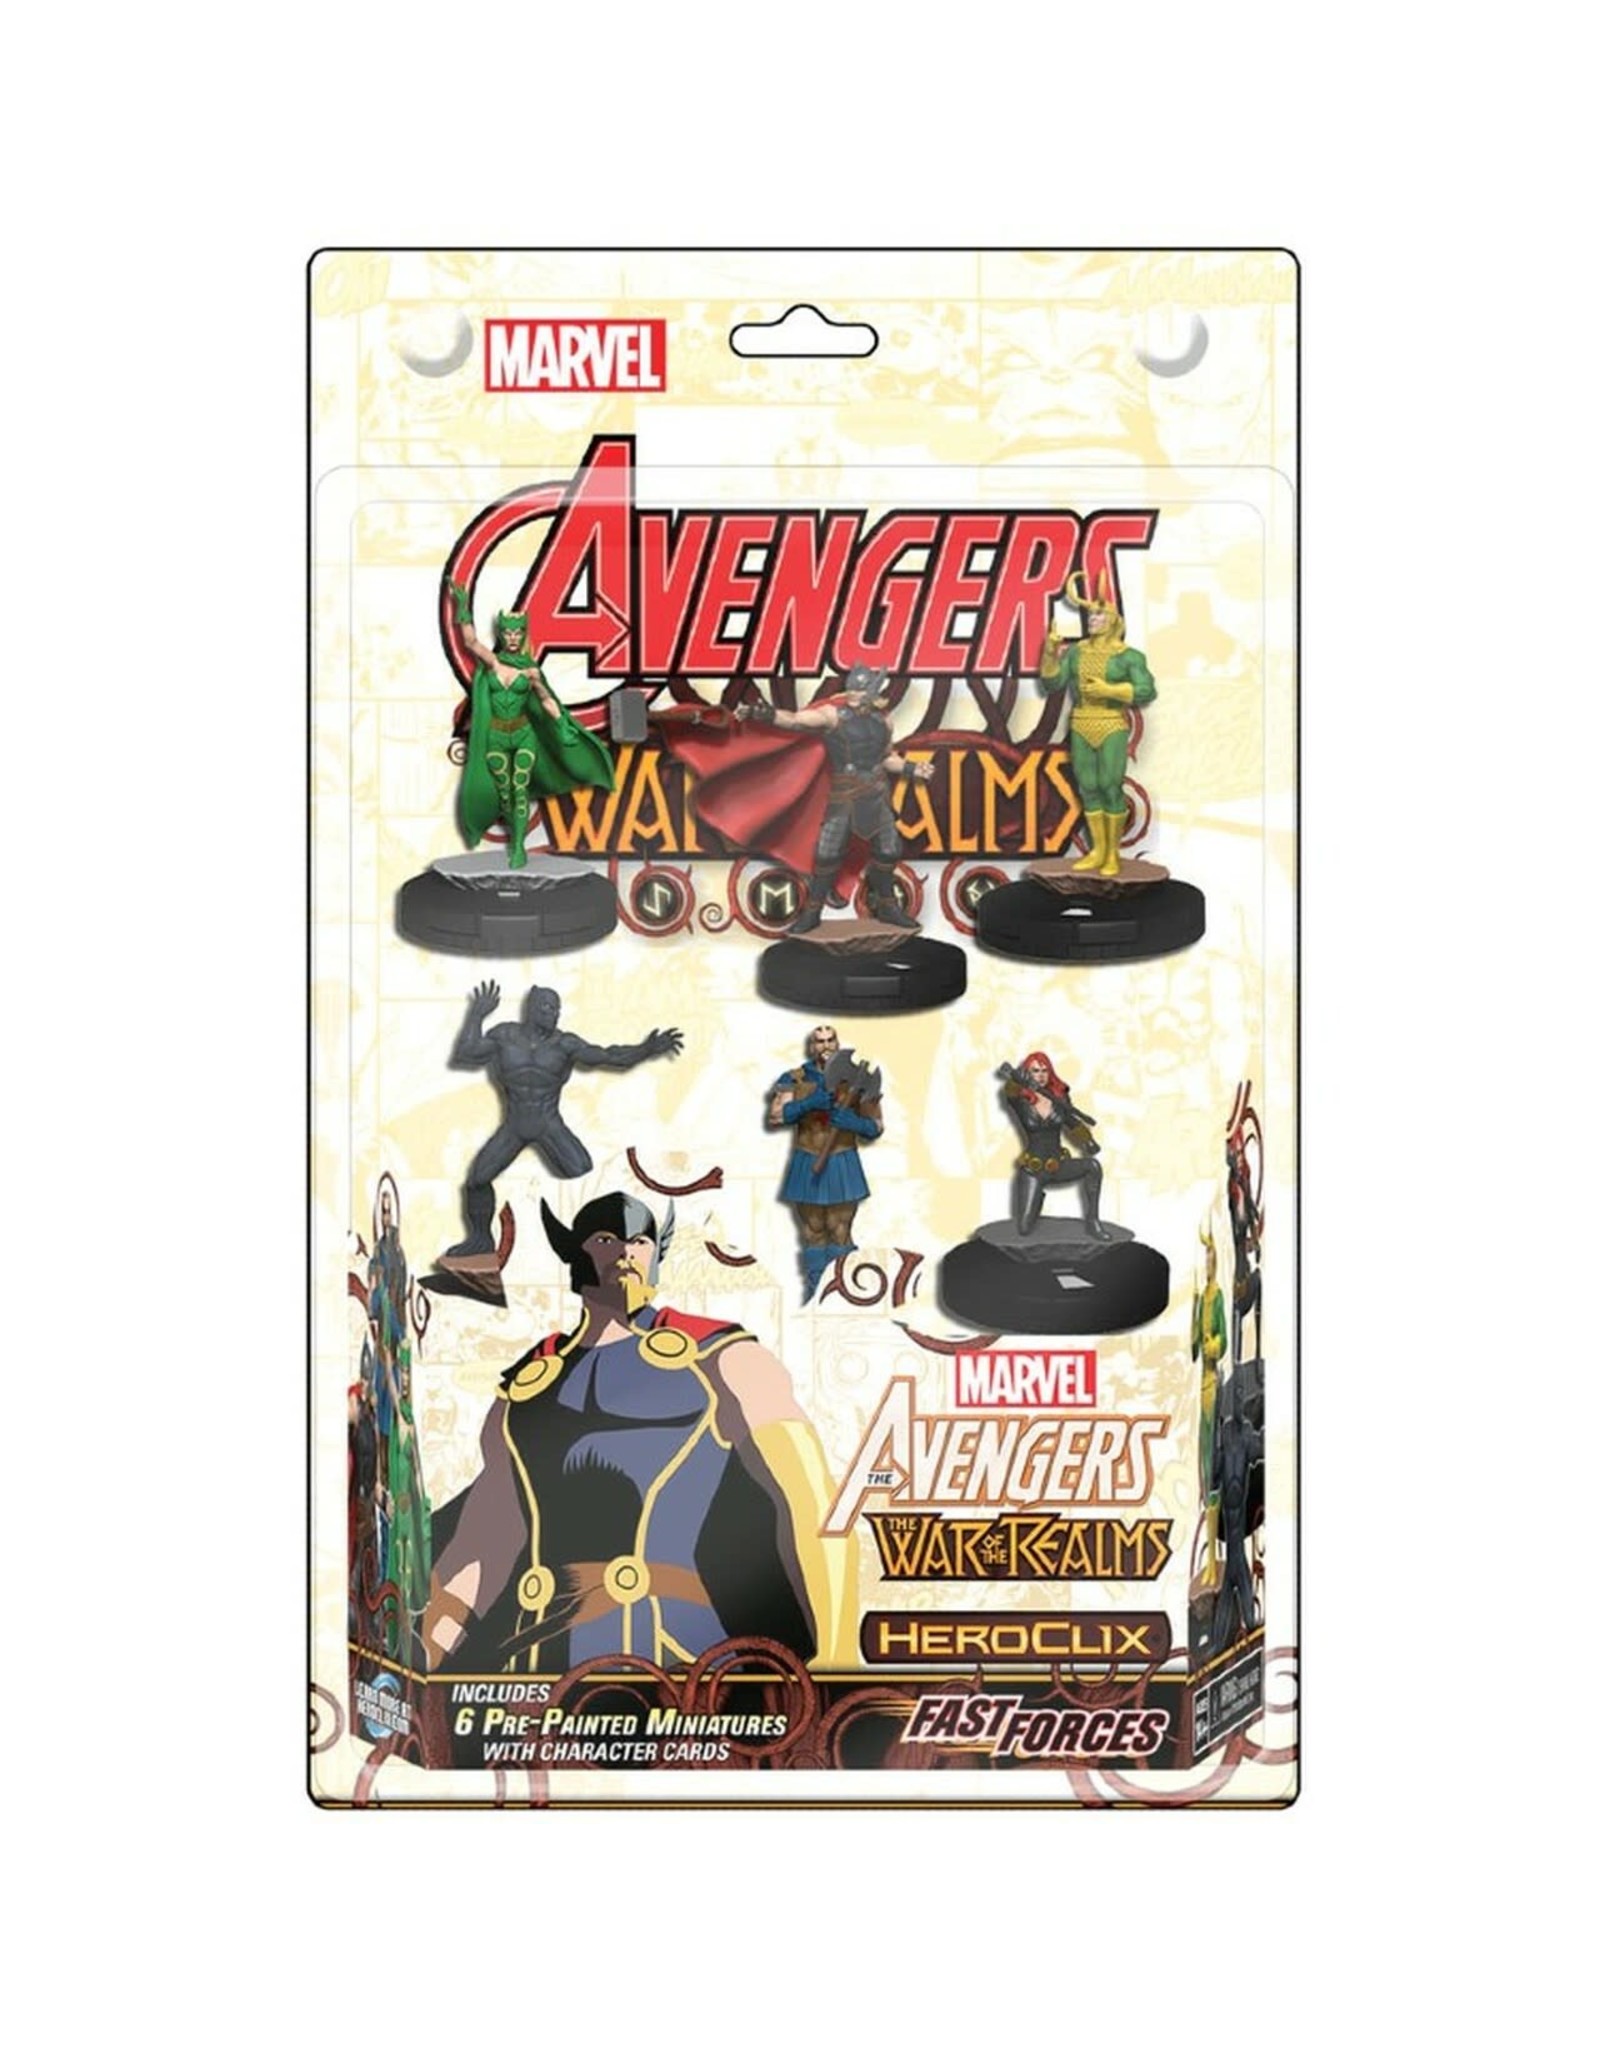 Wizkids Marvel HeroClix: Avengers War of the Realms Fast Forces